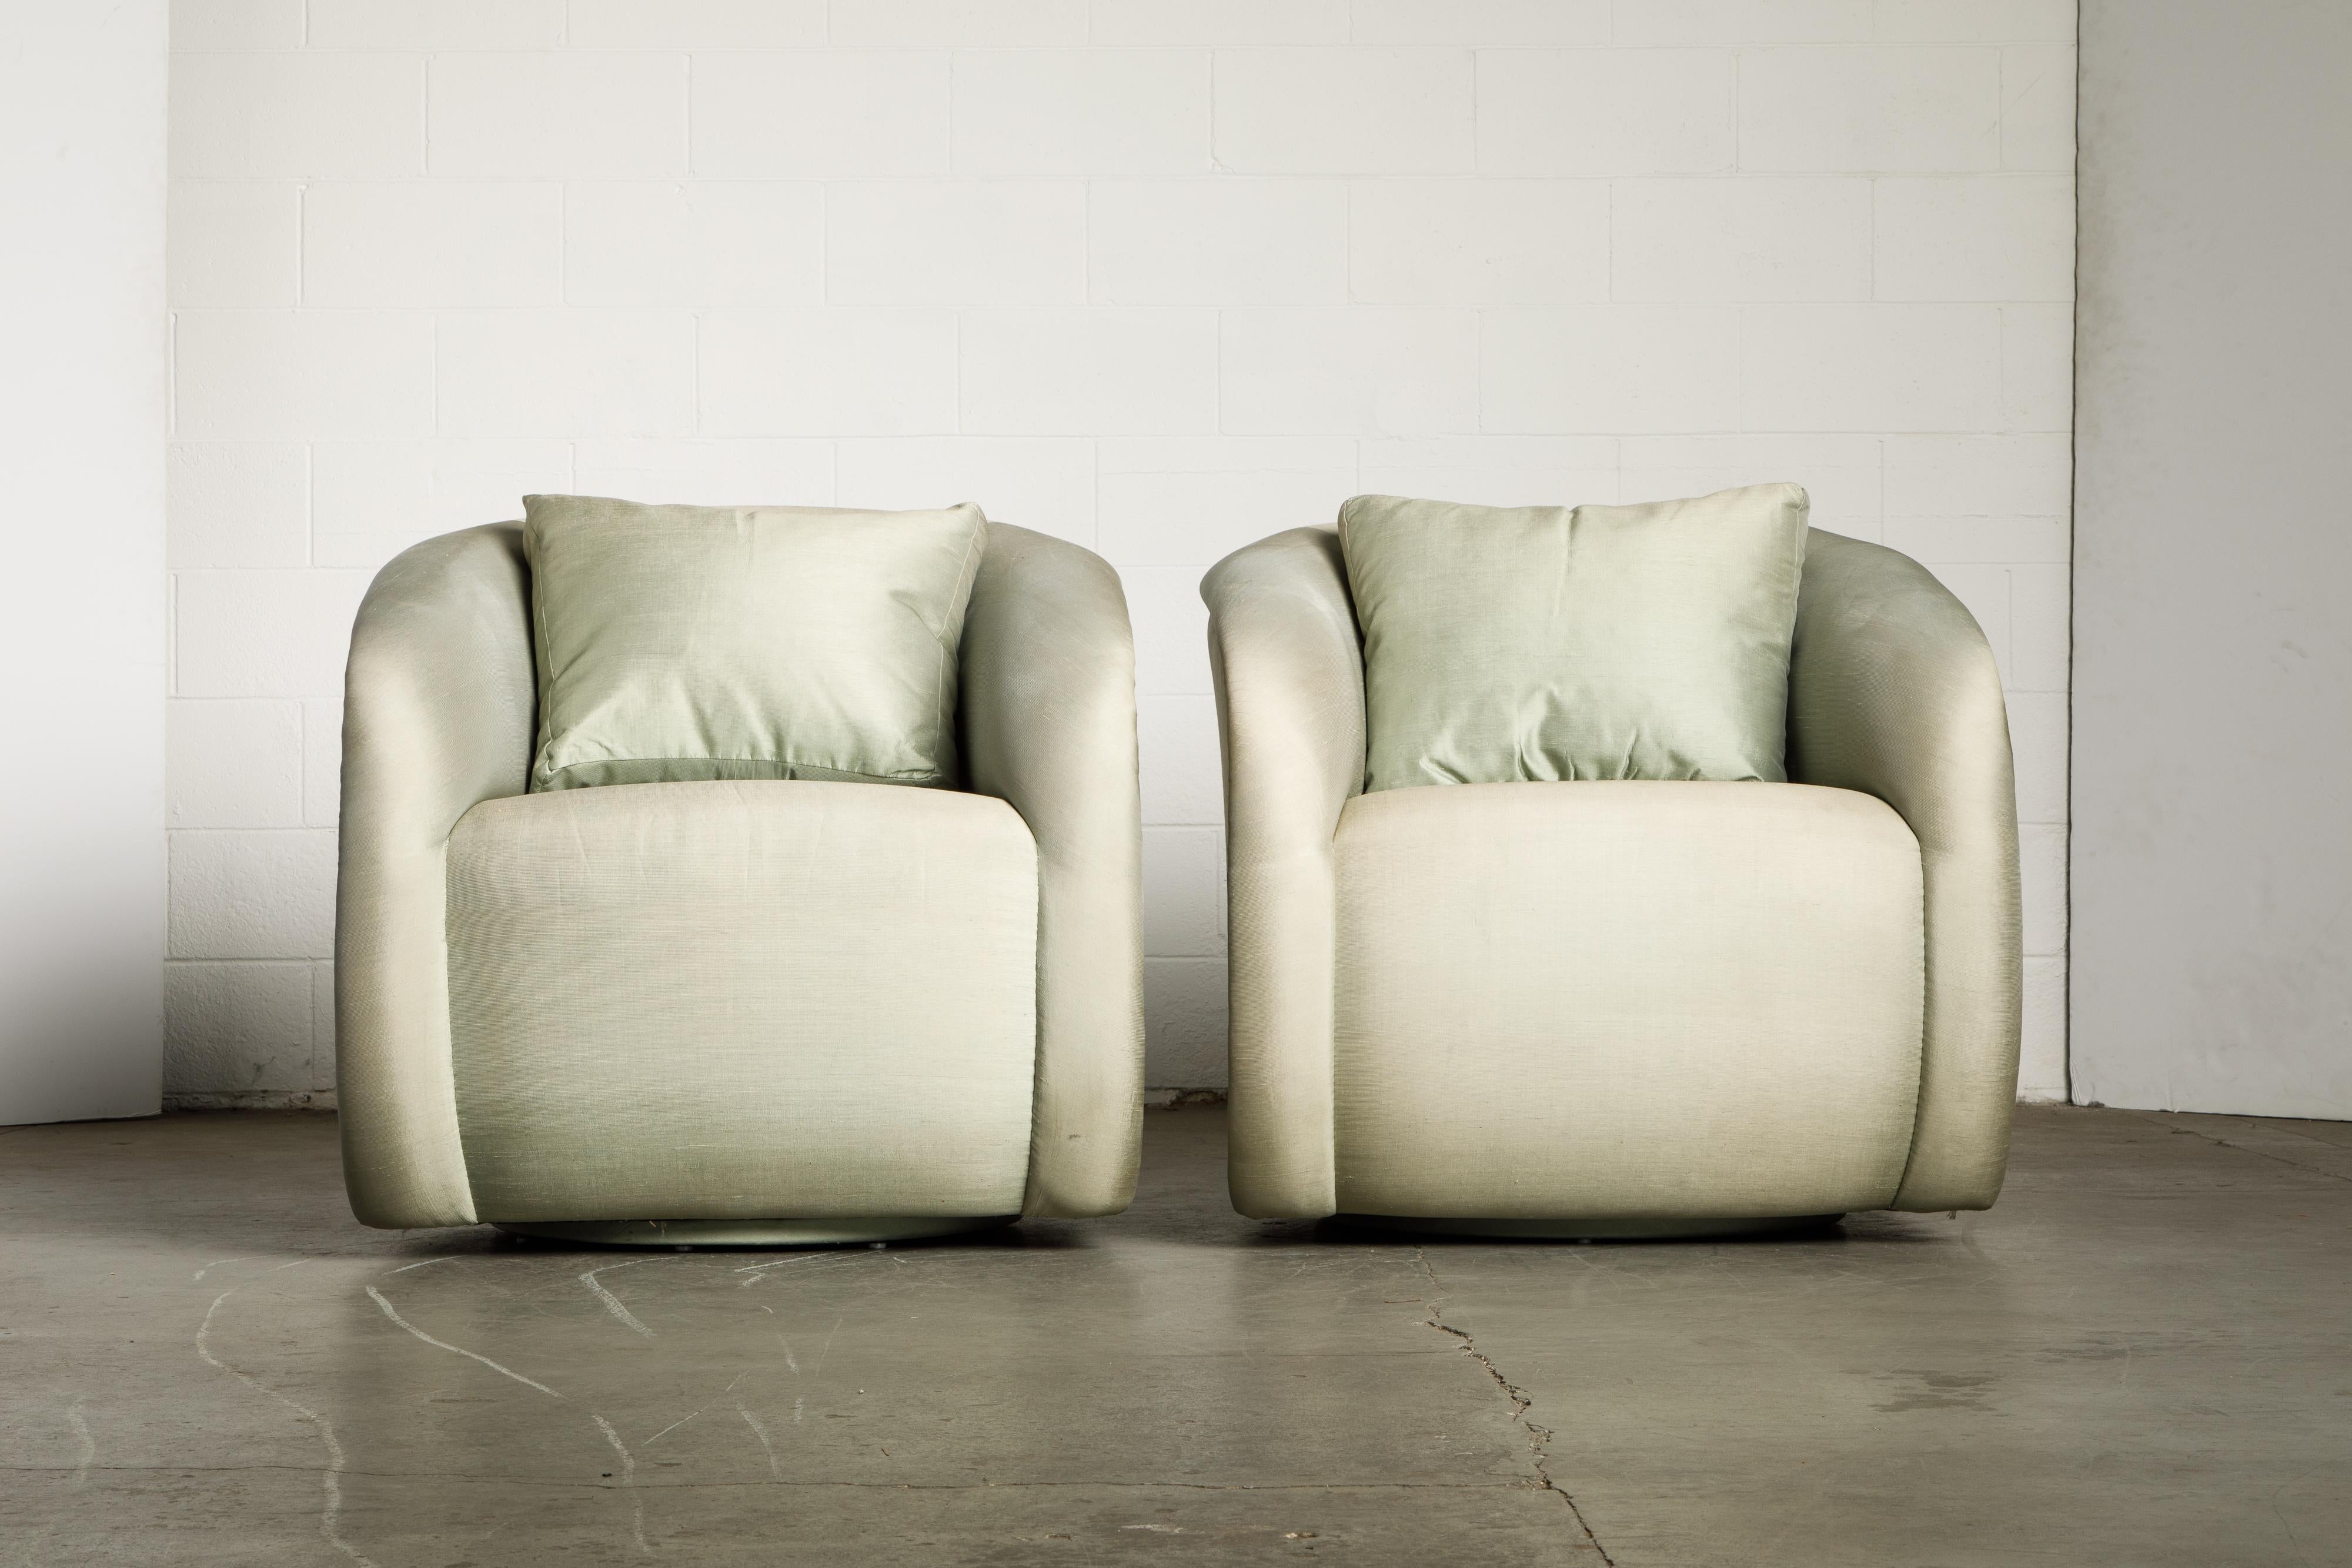 This pair of swivel chairs attributed to Milo Baughman for Directional is upholstered in a light mint green silk fabric with removable loose cushions. Circa 1980s, this pair of club chairs was reupholstered previously and have had moderate use since